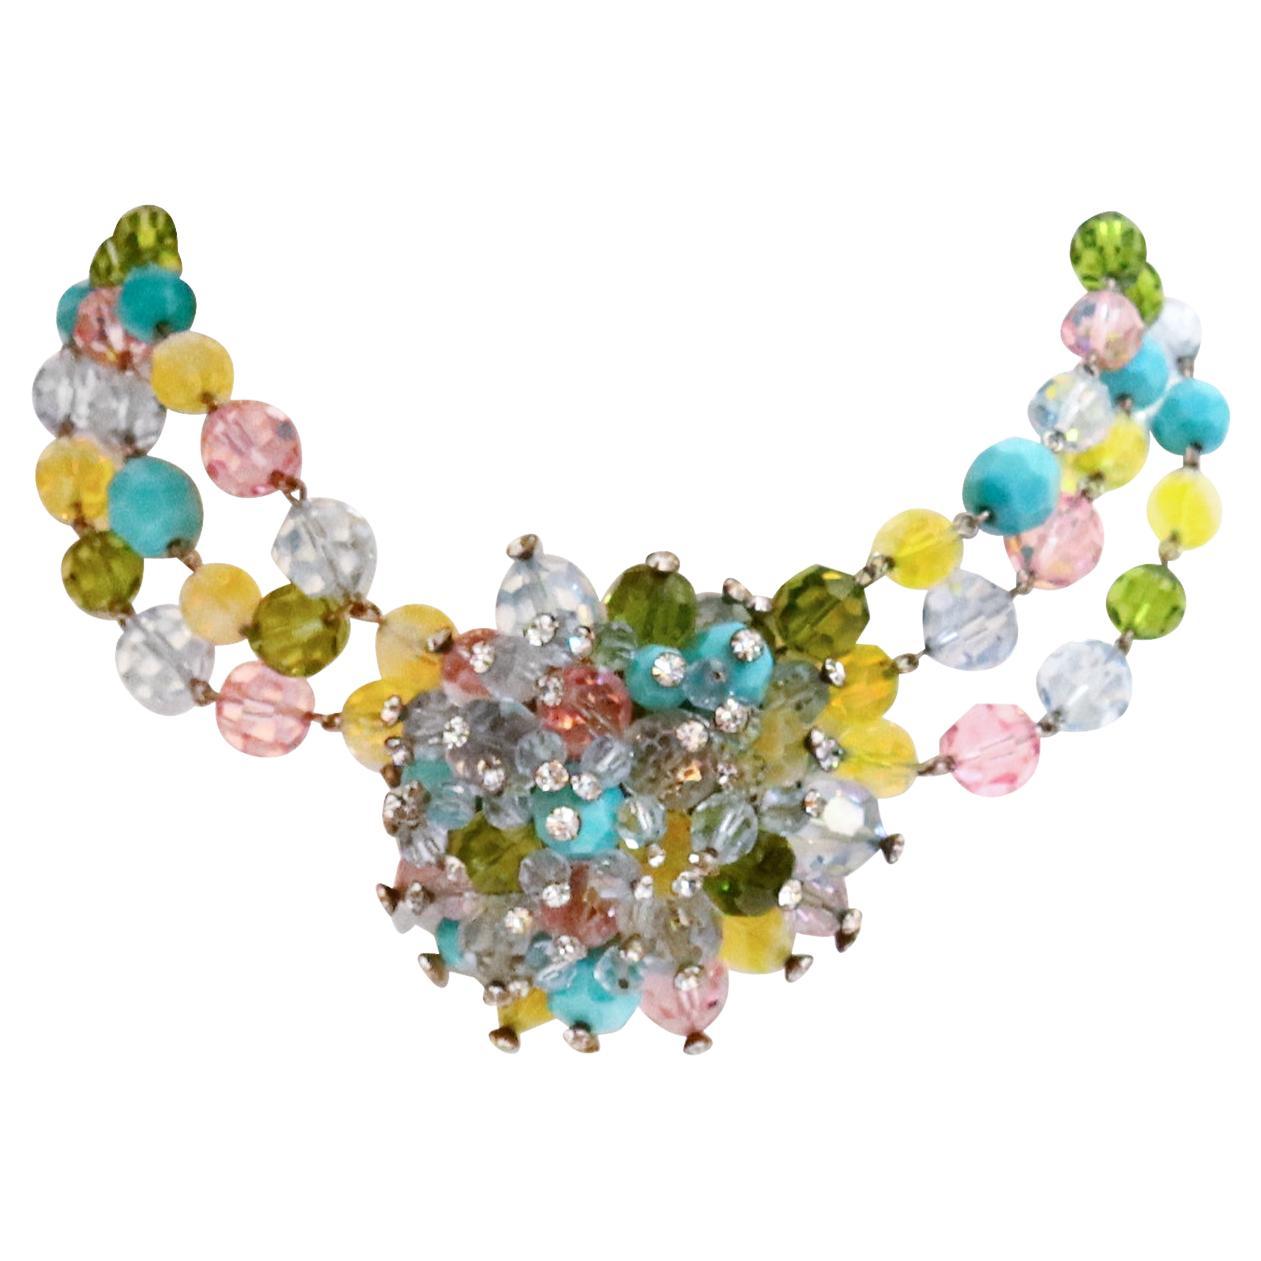 Vintage French Beaded Choker Necklace Circa 1980s. This is so gorgeous and needs to be on a neck to really show off.  I was told this is  Dior Couture Runway due to the colors and design. They are all light iridescent colors except for the matte